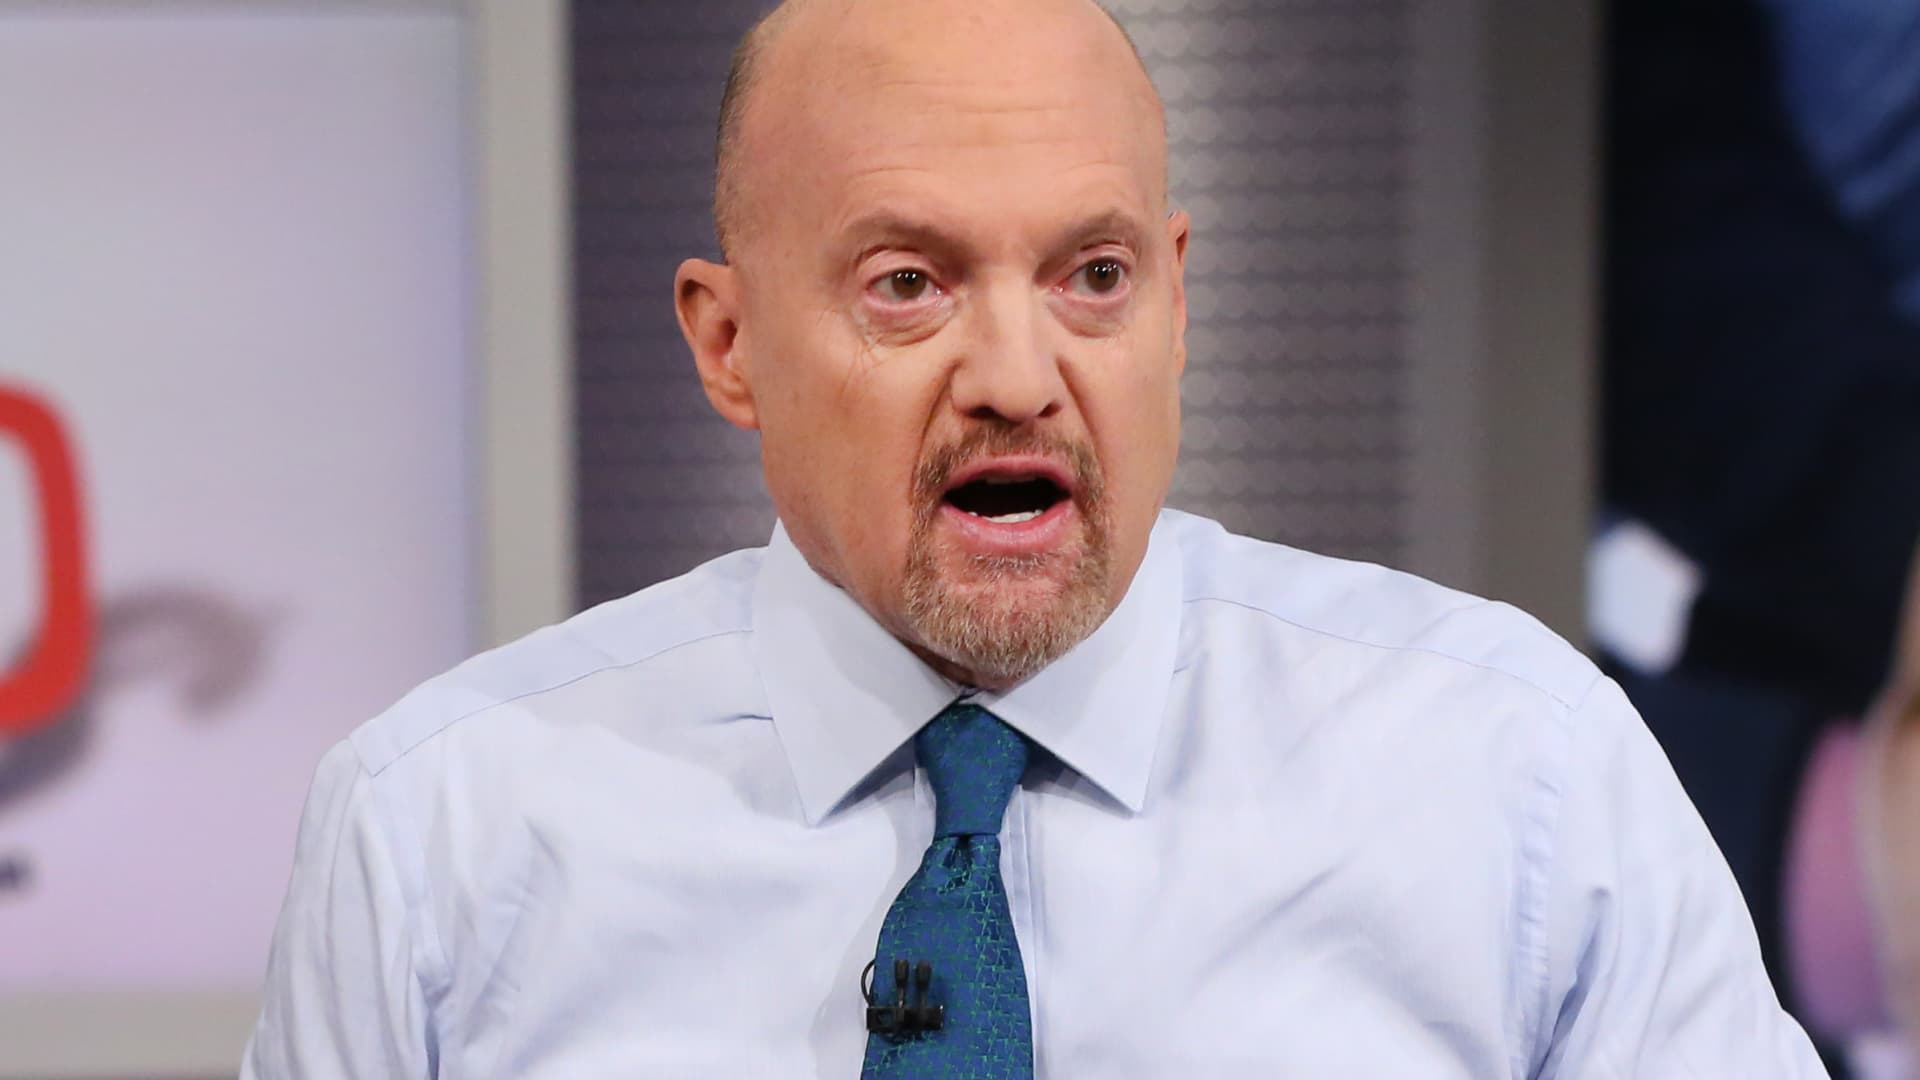 Jim Cramer says the economy is stabilizing and can avoid a recession